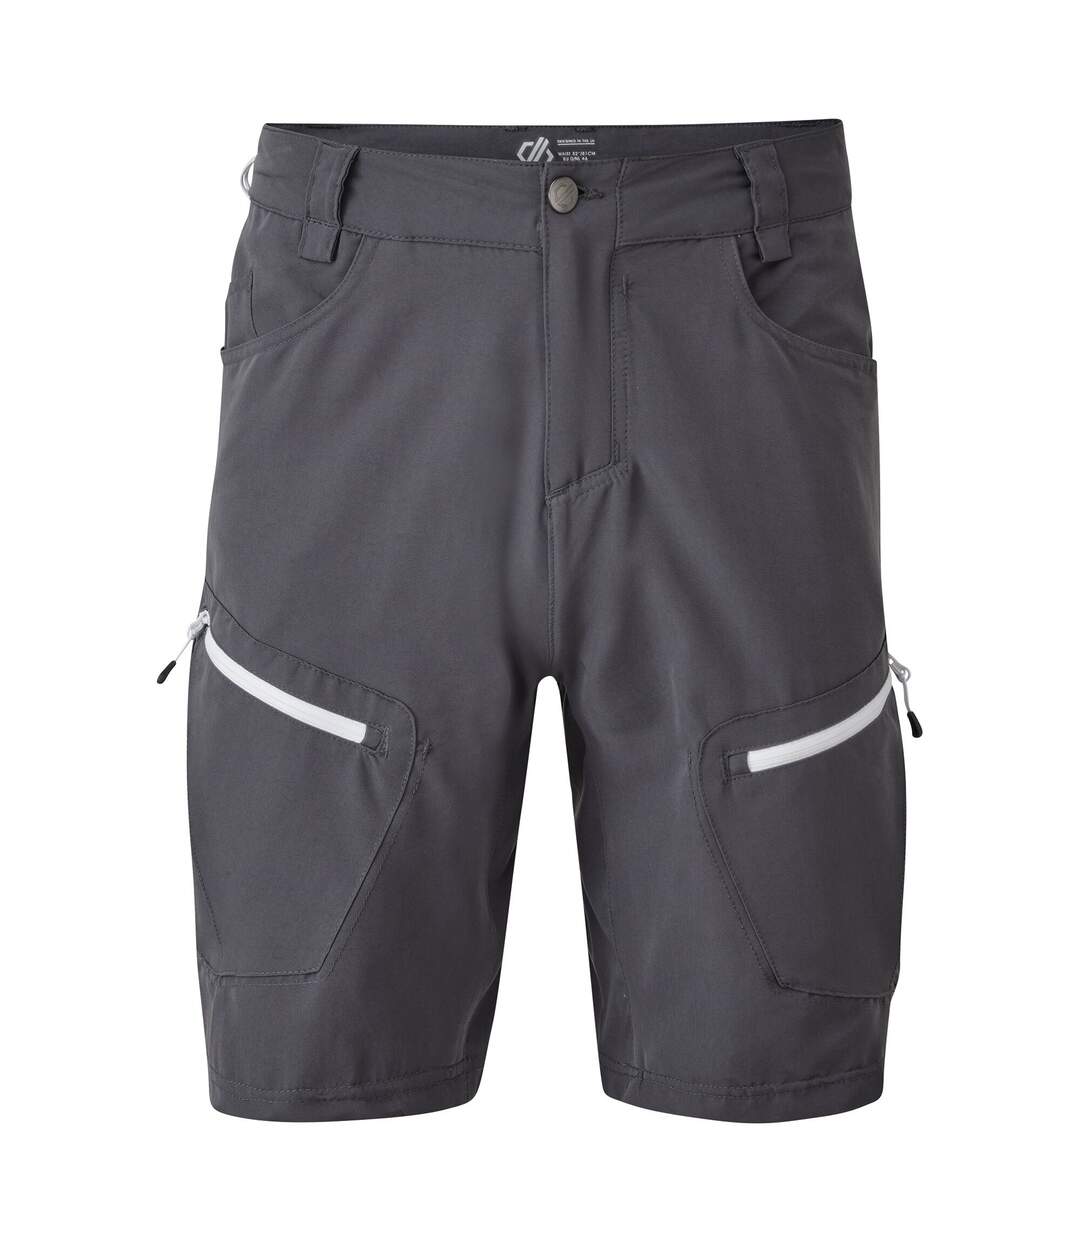 Dare 2B - Short TUNED IN - Homme (Gris anthracite) - UTRG4078